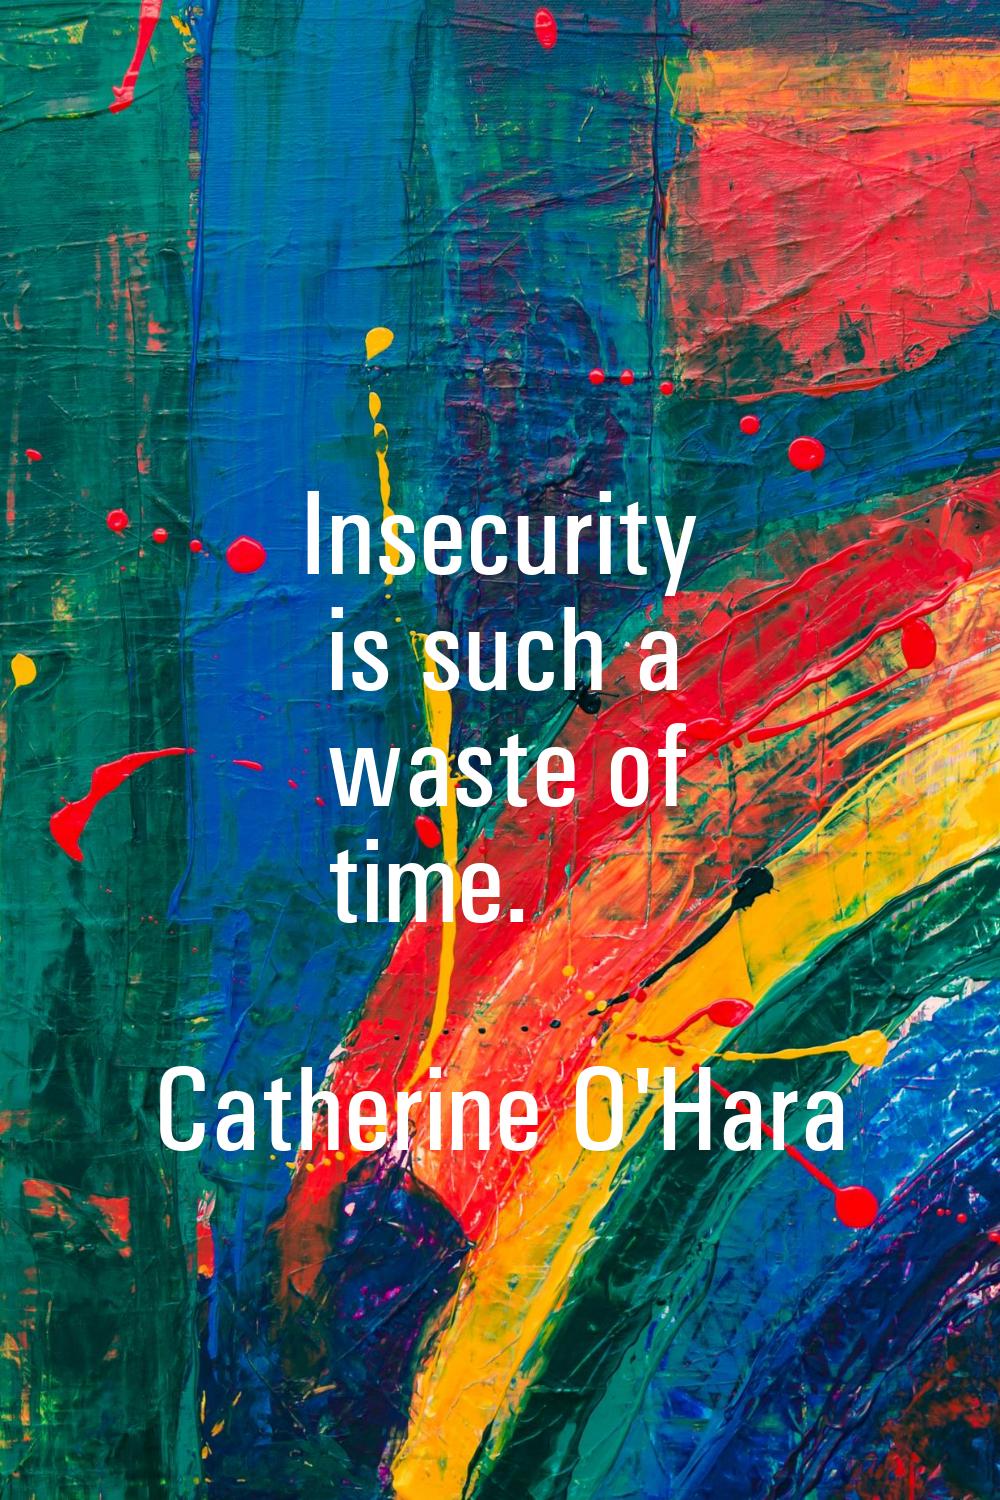 Insecurity is such a waste of time.